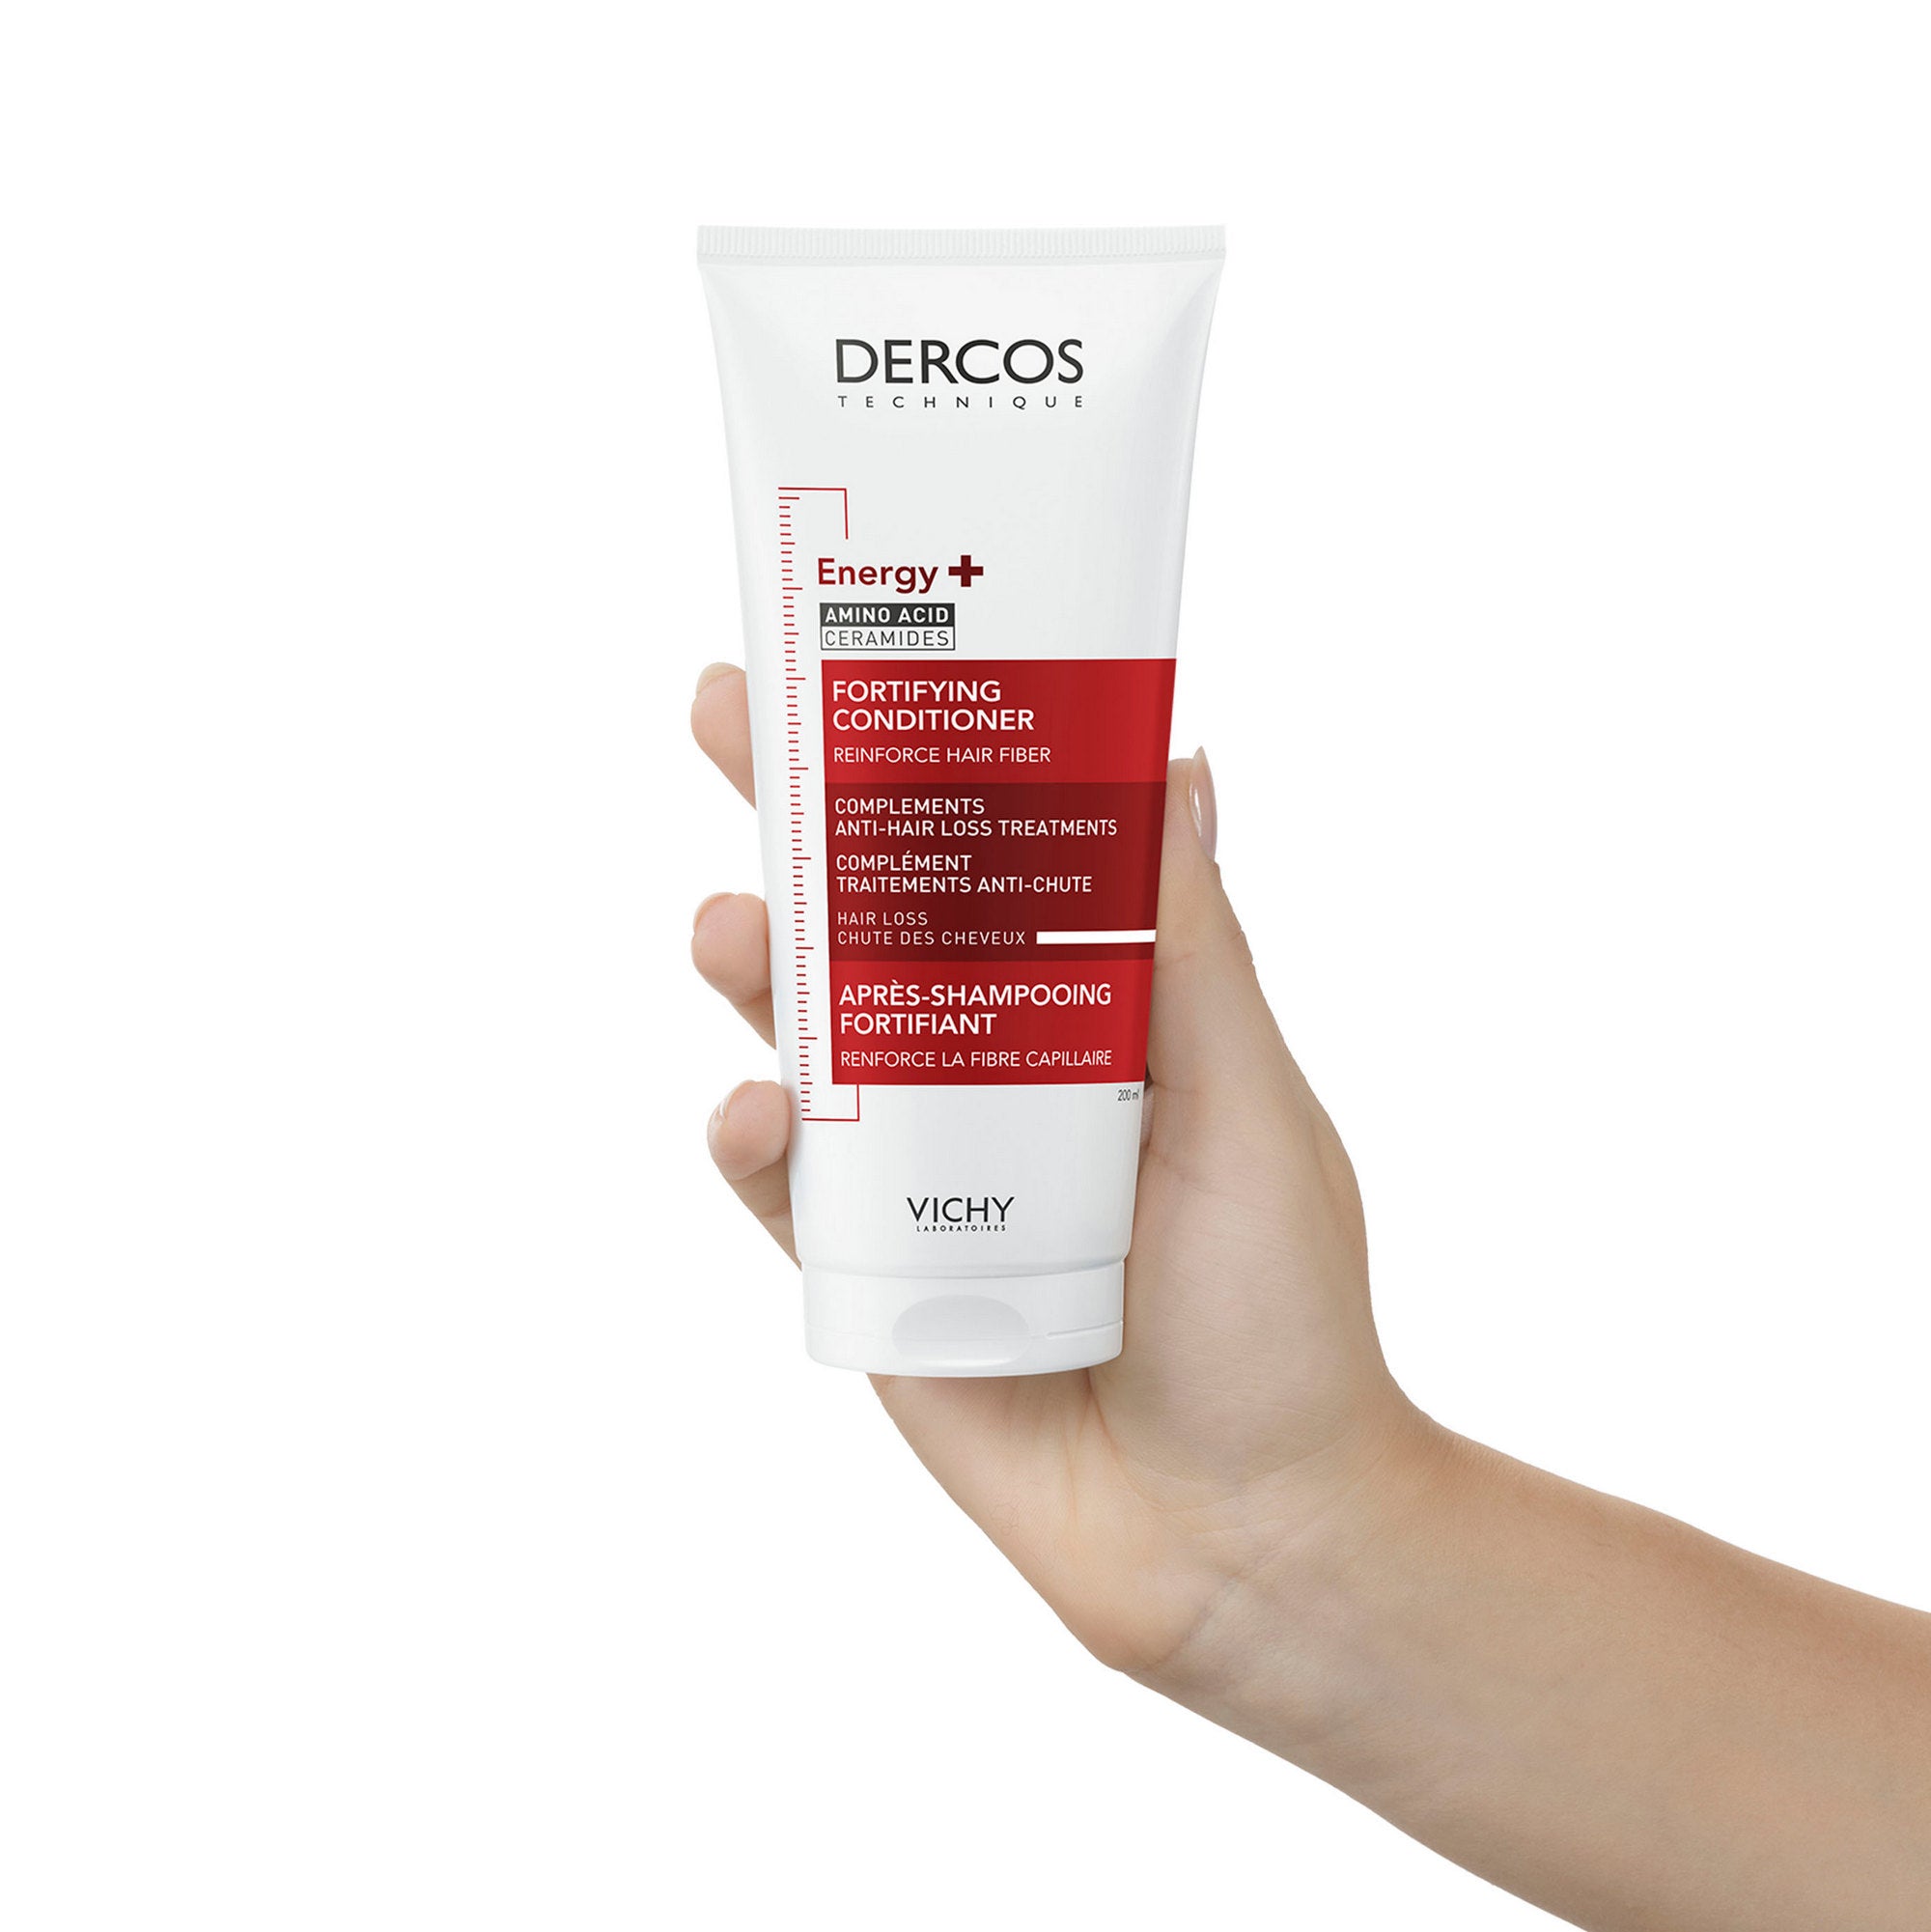 Vichy Dercos Energy+ Fortifying Conditioner for Hair Loss Due to Breakage 200ml